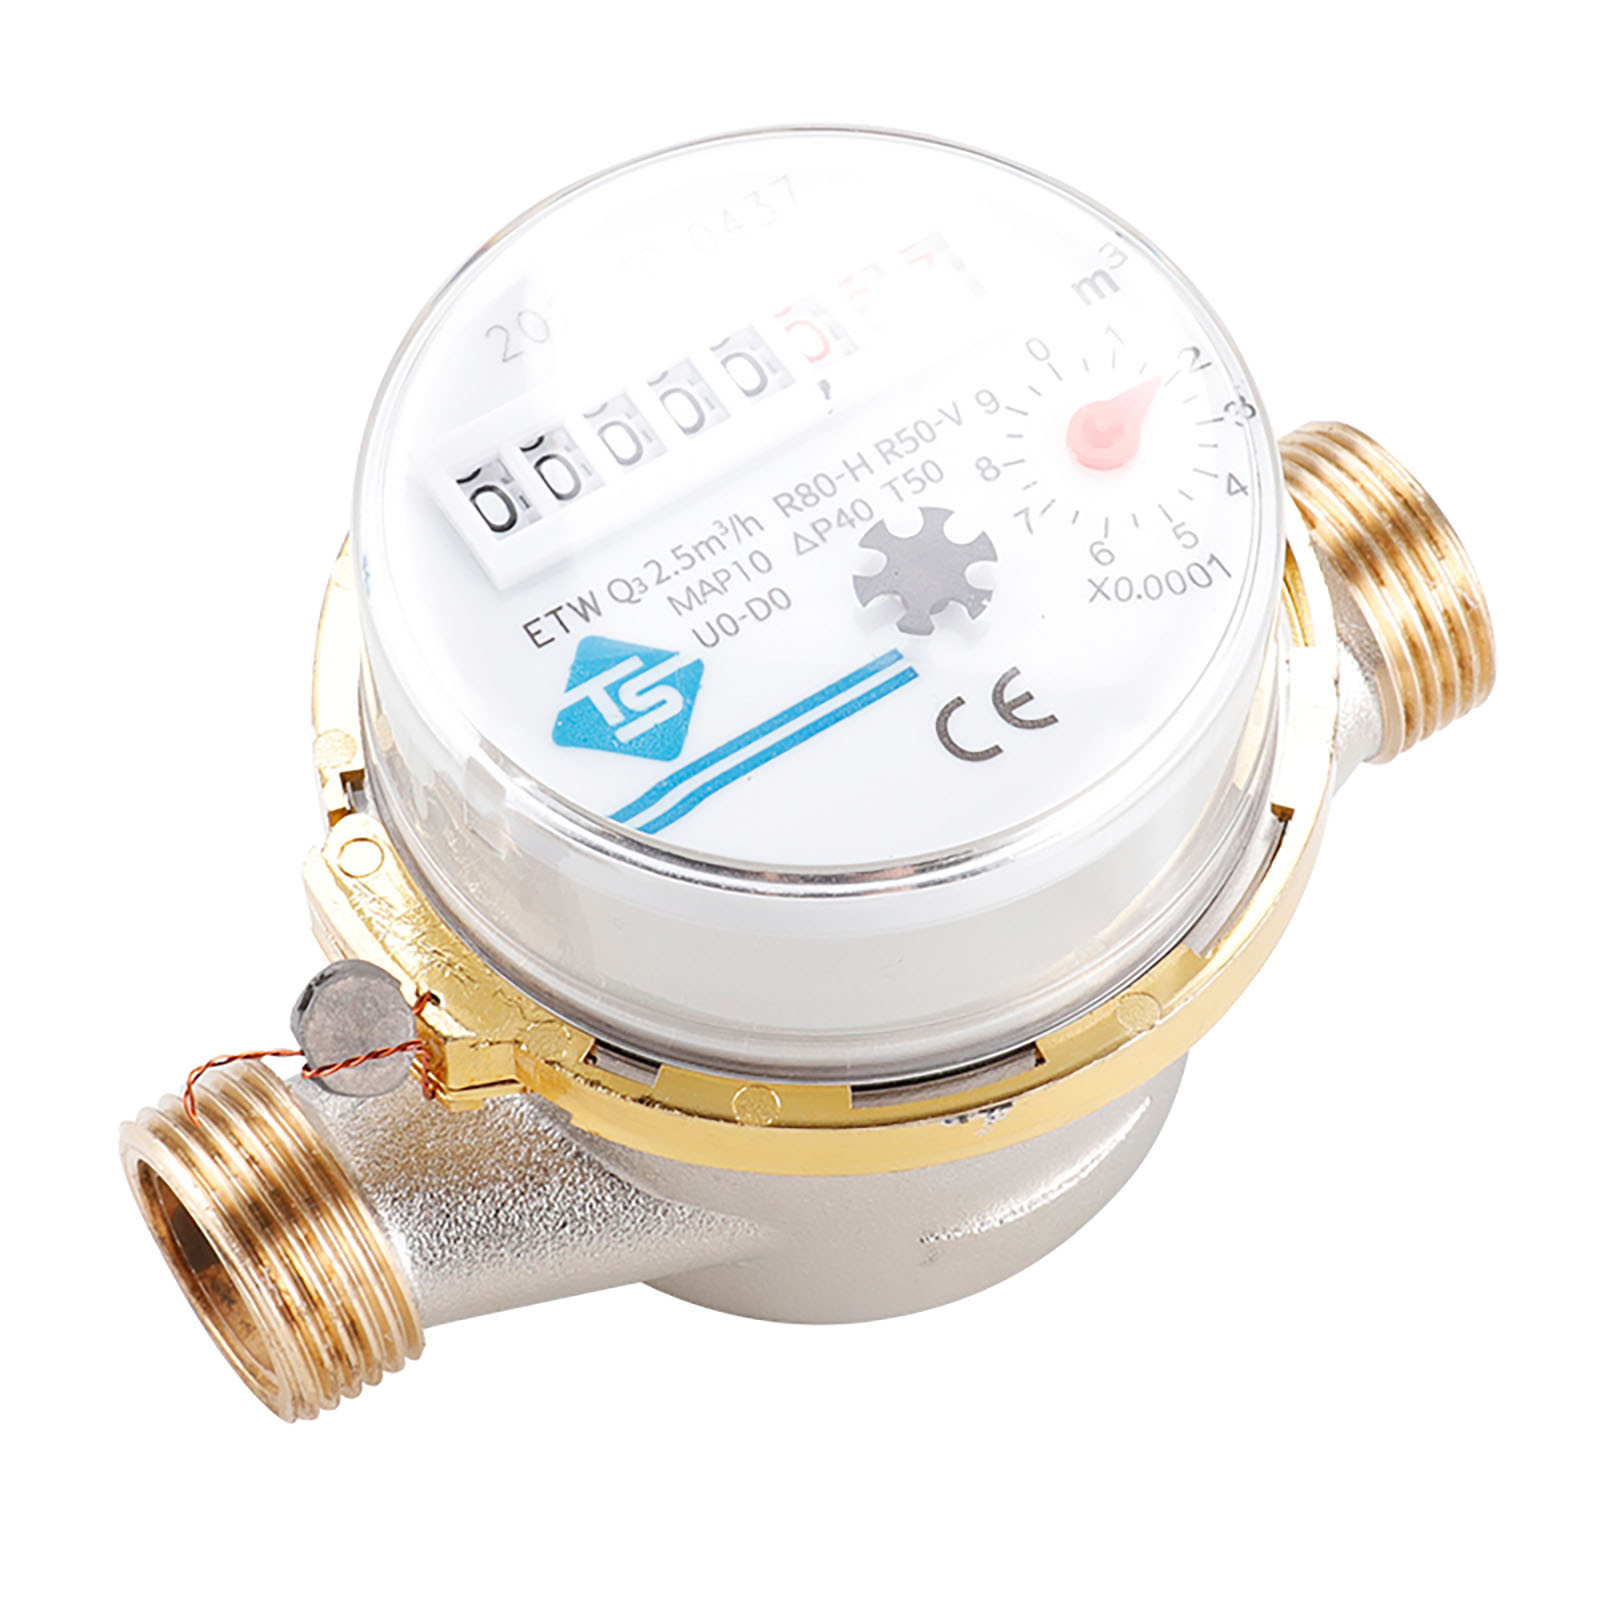 Smart water meter for hydropower decoration, household machinery, rotary wing pointer digital display combination water meter55#